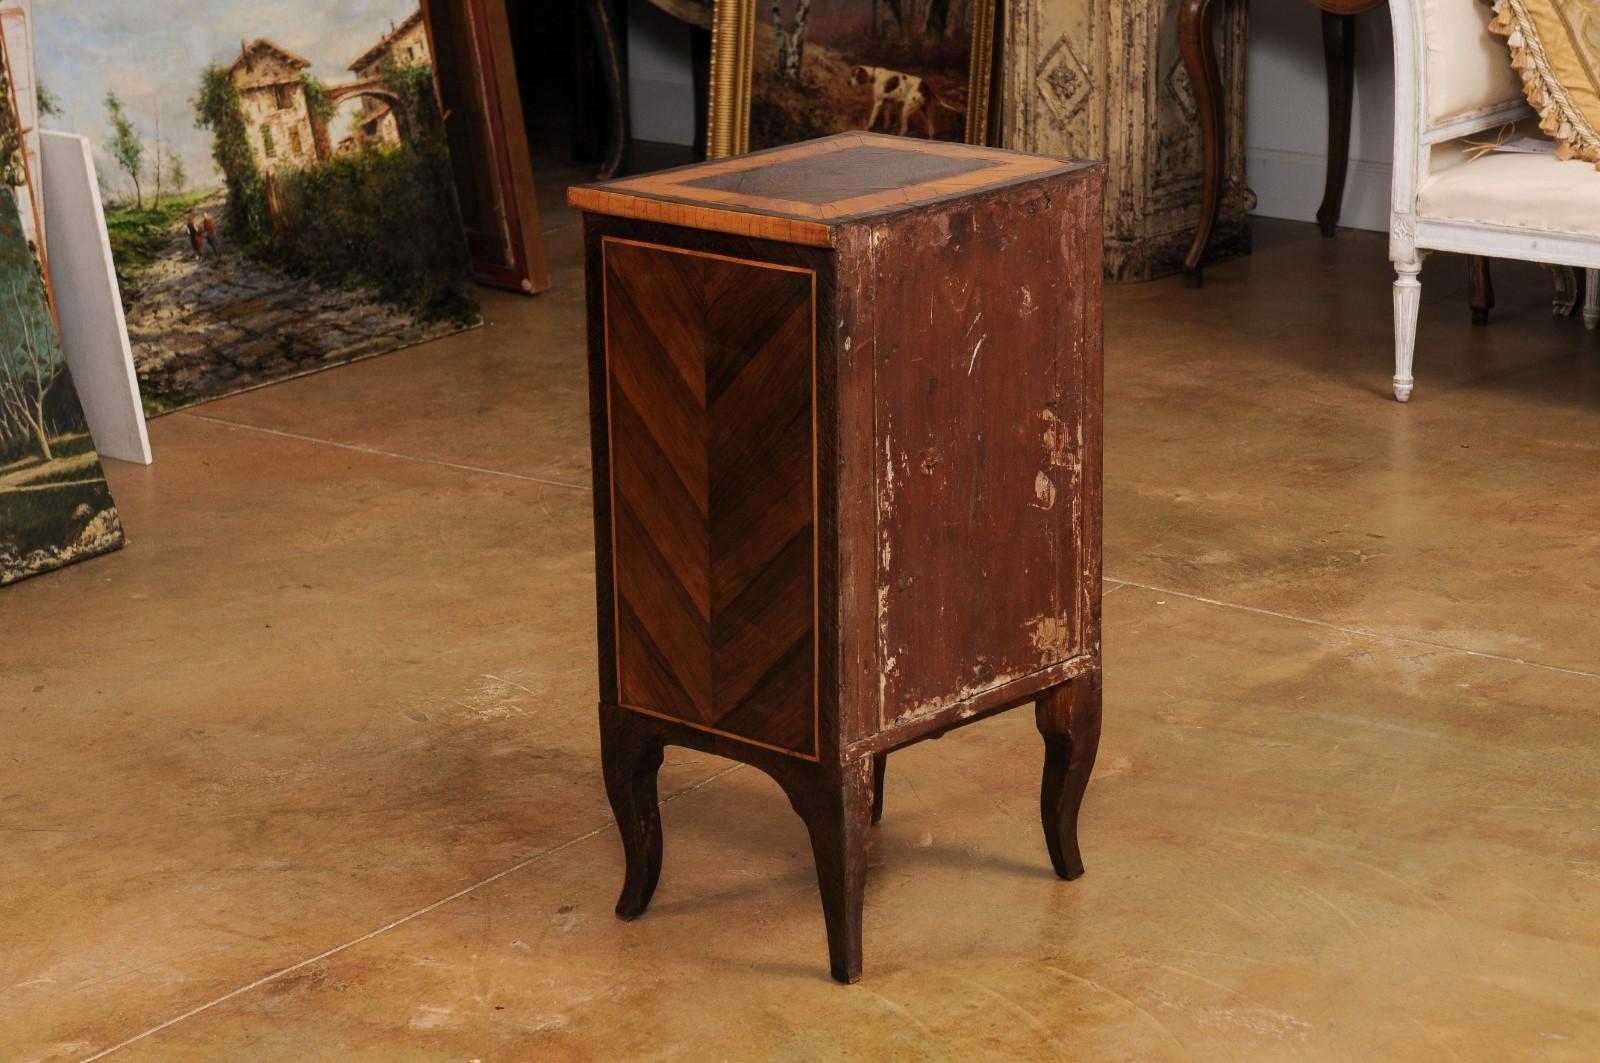 Italian 19th Century Bedside Table with Inlaid Décor, Single Drawer and Door For Sale 4